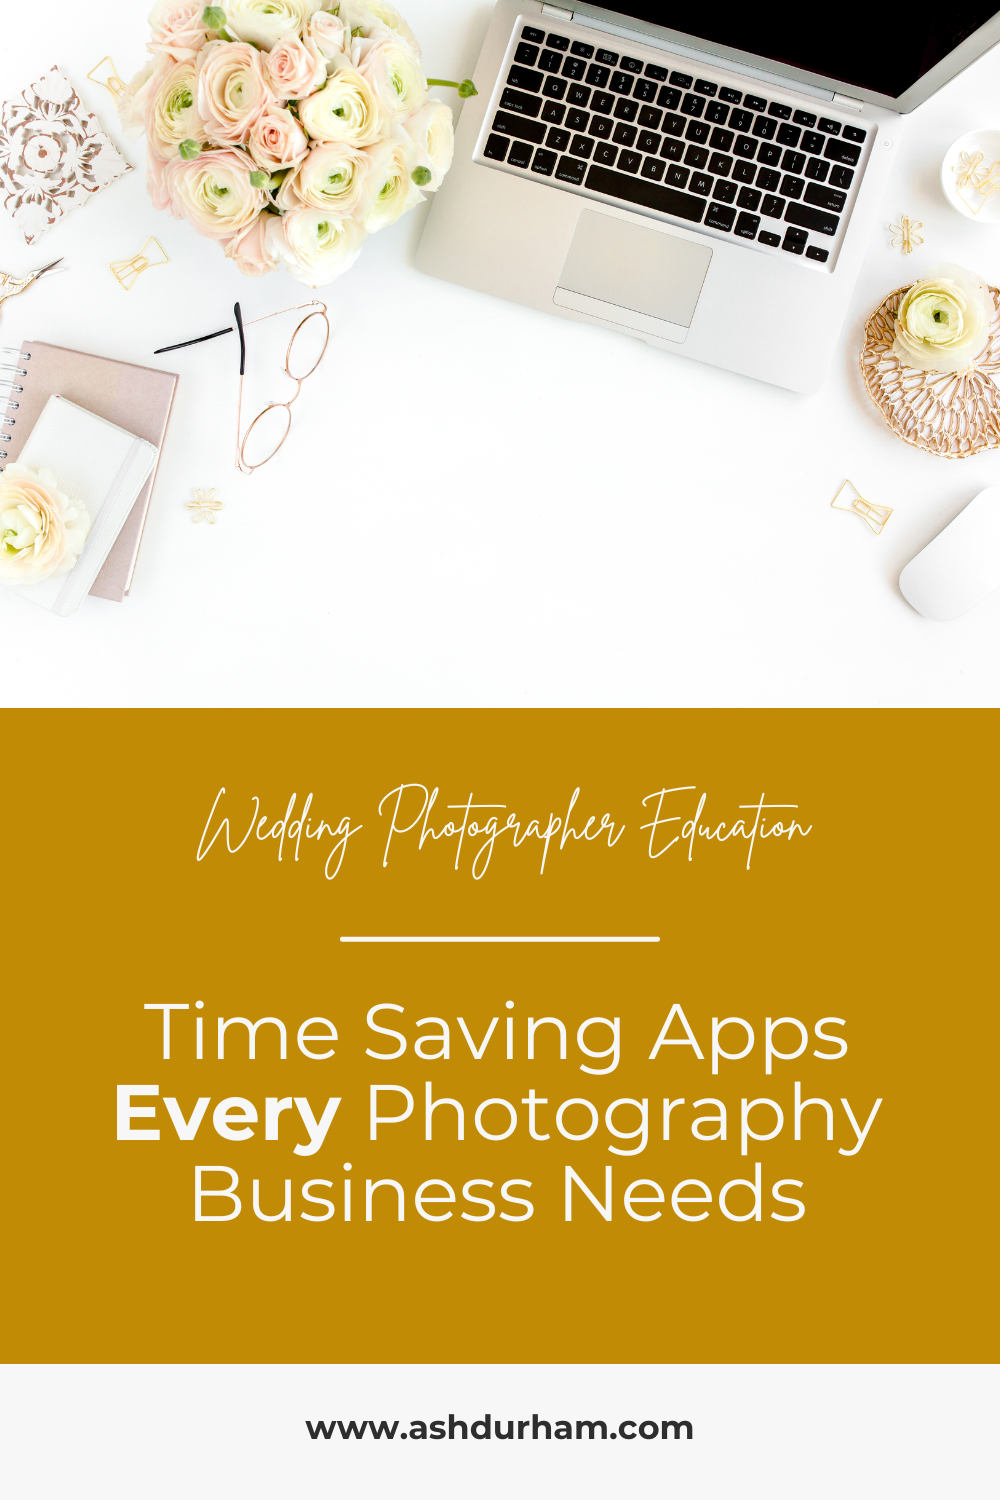 Time Saving Apps Every Photography Business Needs